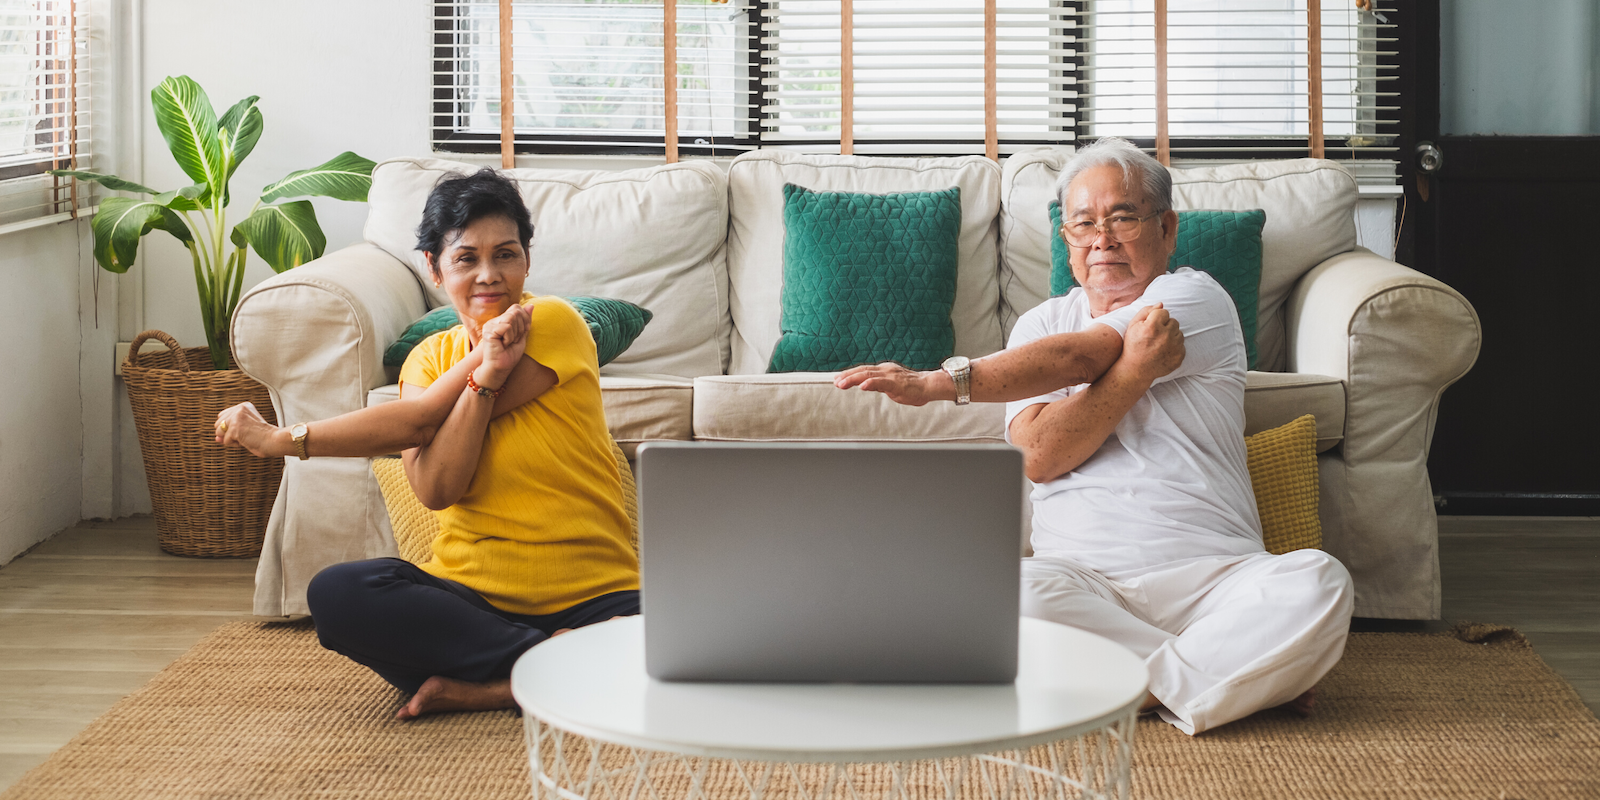 A senior Asian woman with short black hair wearing black pants and an orange t-shirt and senior Asian man with white hair wearing white pants and a white t-shirt sit on the floor in front of a couch, an open laptop on the table in front of them. The sit cross-legged and stretch their arms across their chests following the program on the computer.